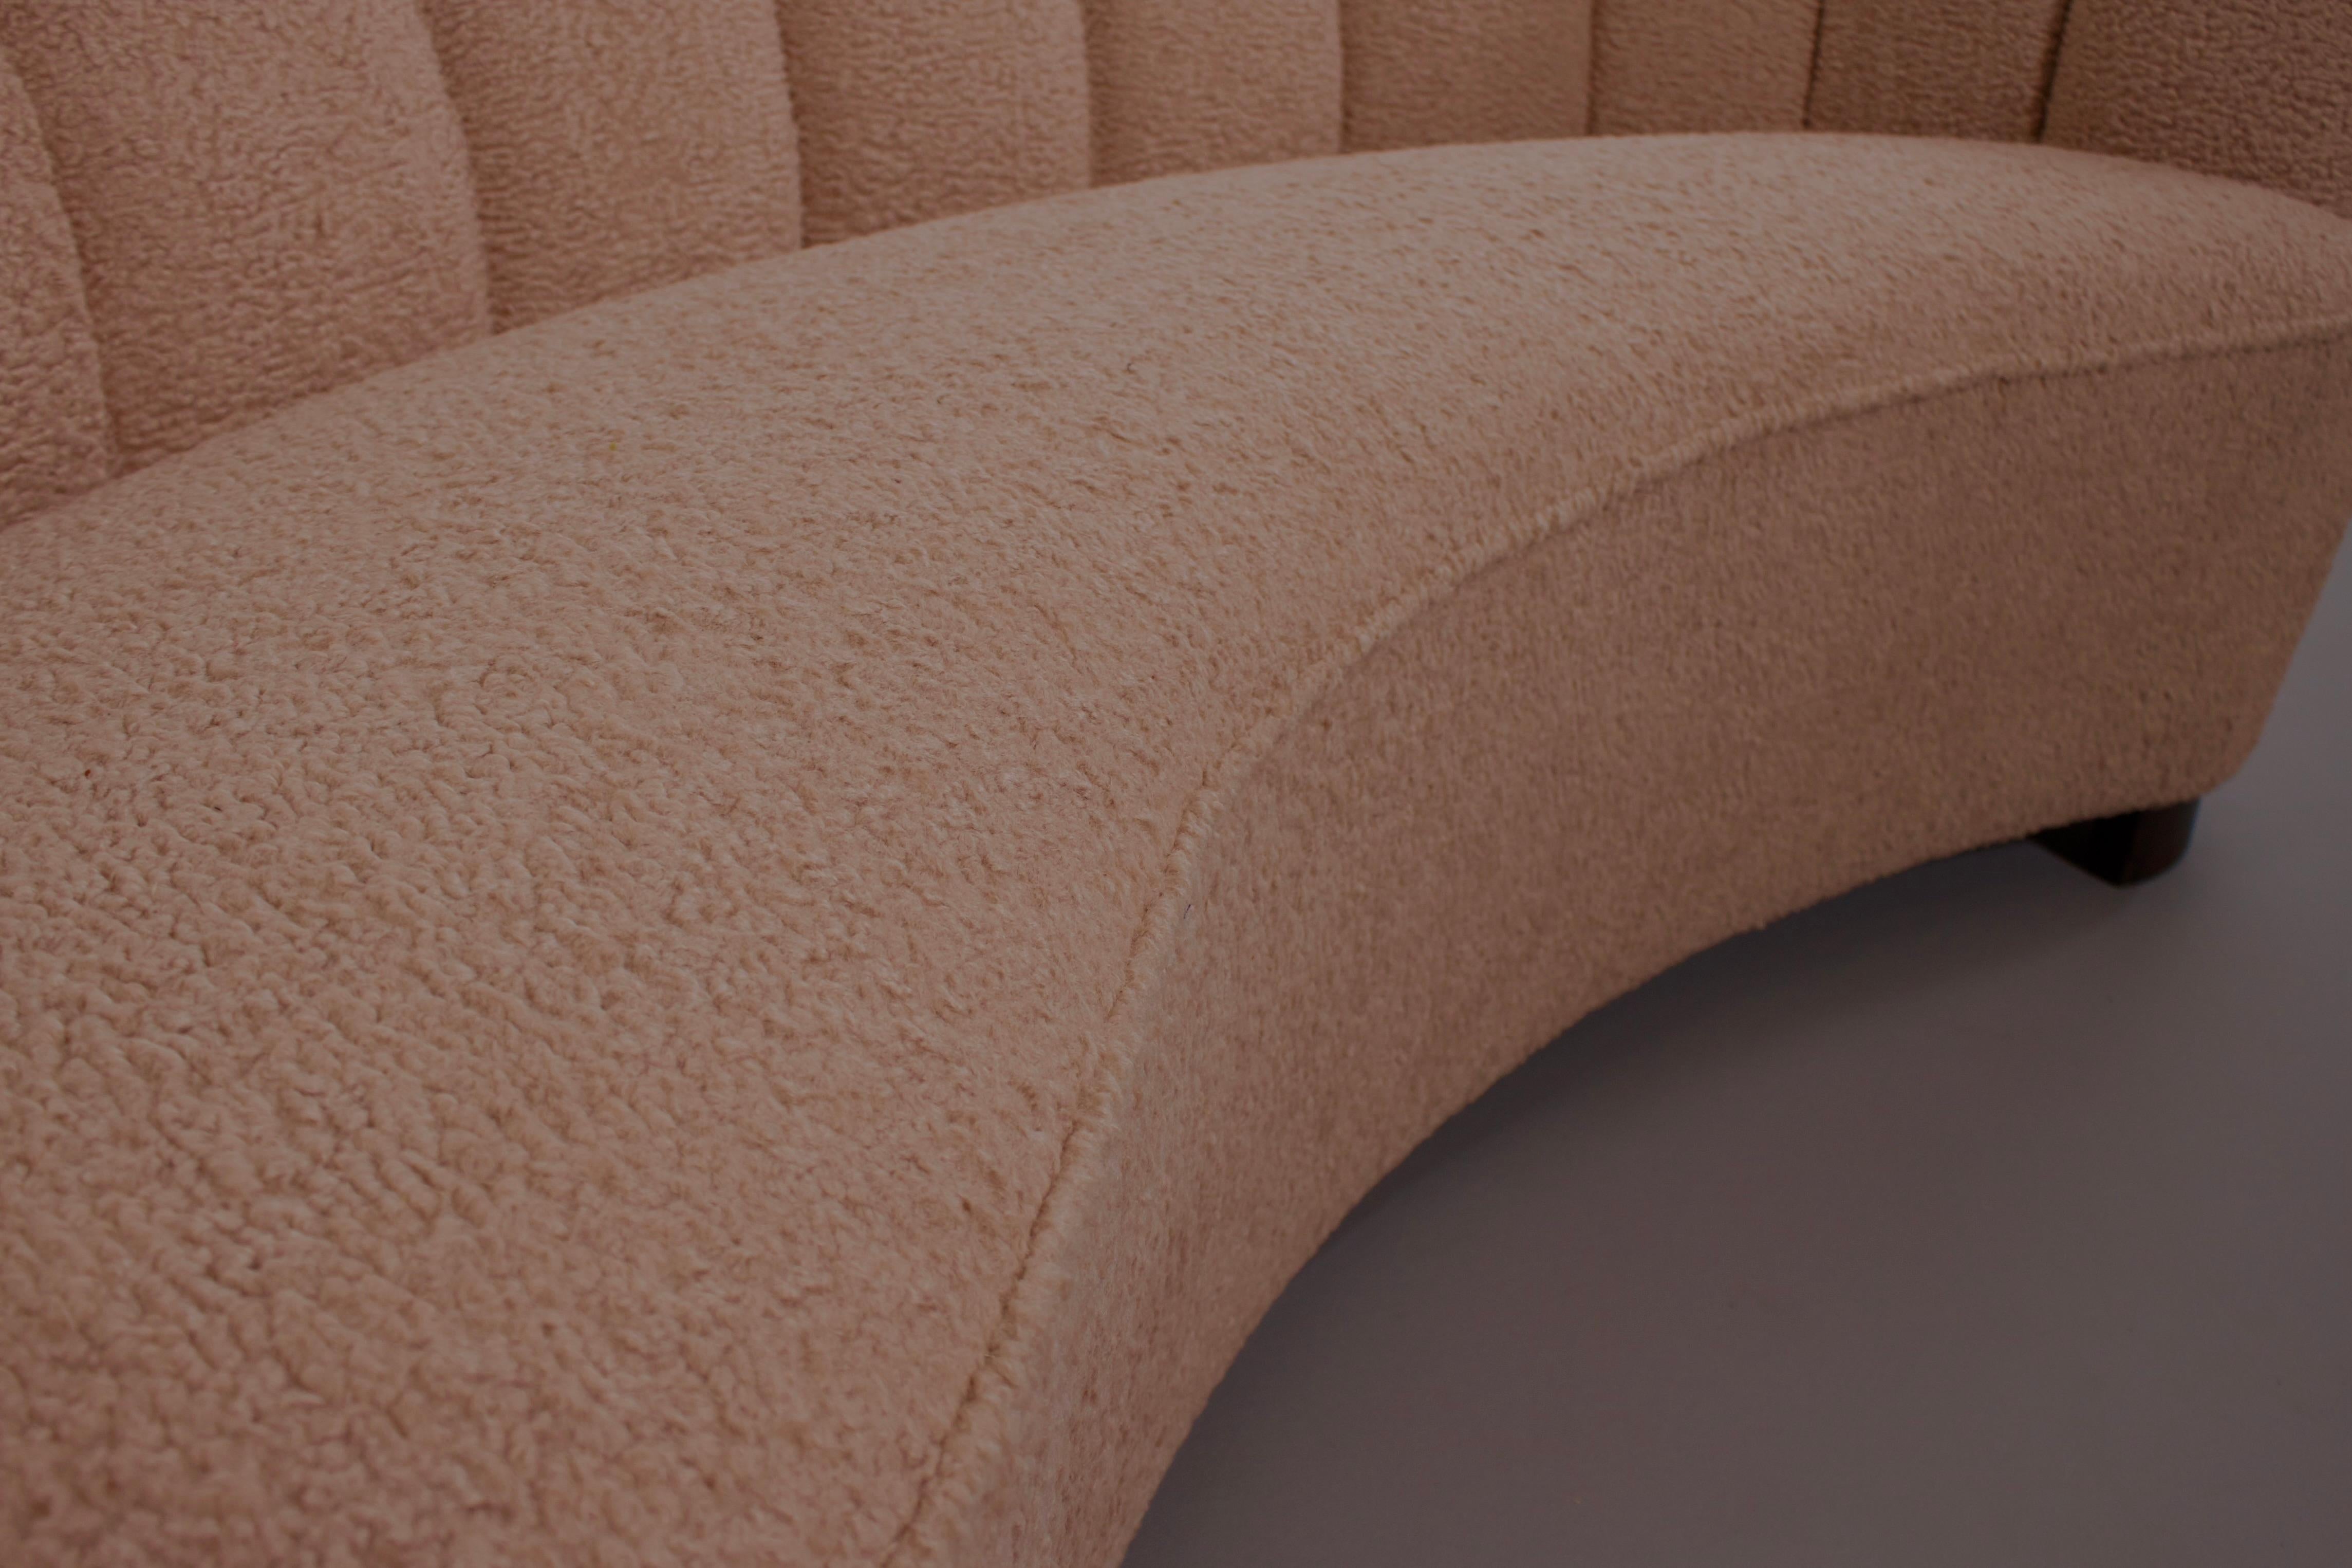 Danish Curved Banana Sofa in a Powder Pink Wool Fabric, 1940s For Sale 1